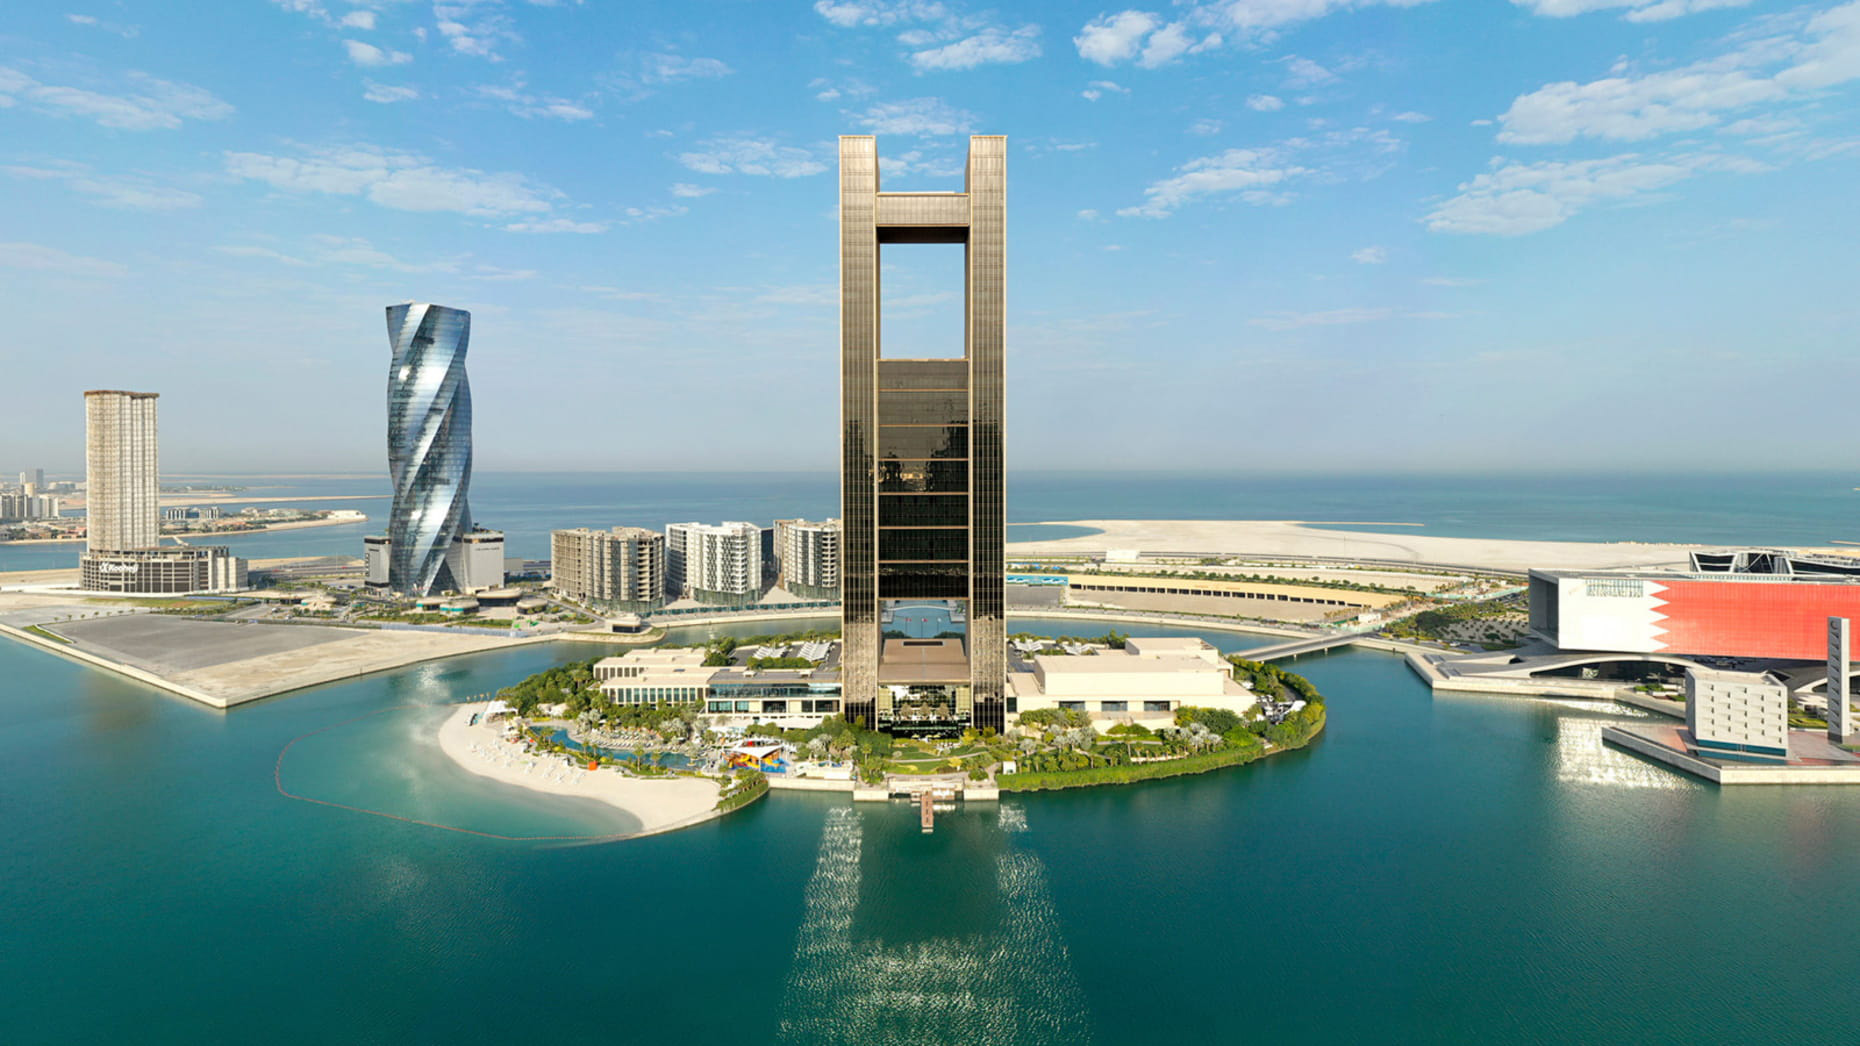 Wolfgang Puck To Host F1 Lawn Party On Private Island In Bahrain Bay